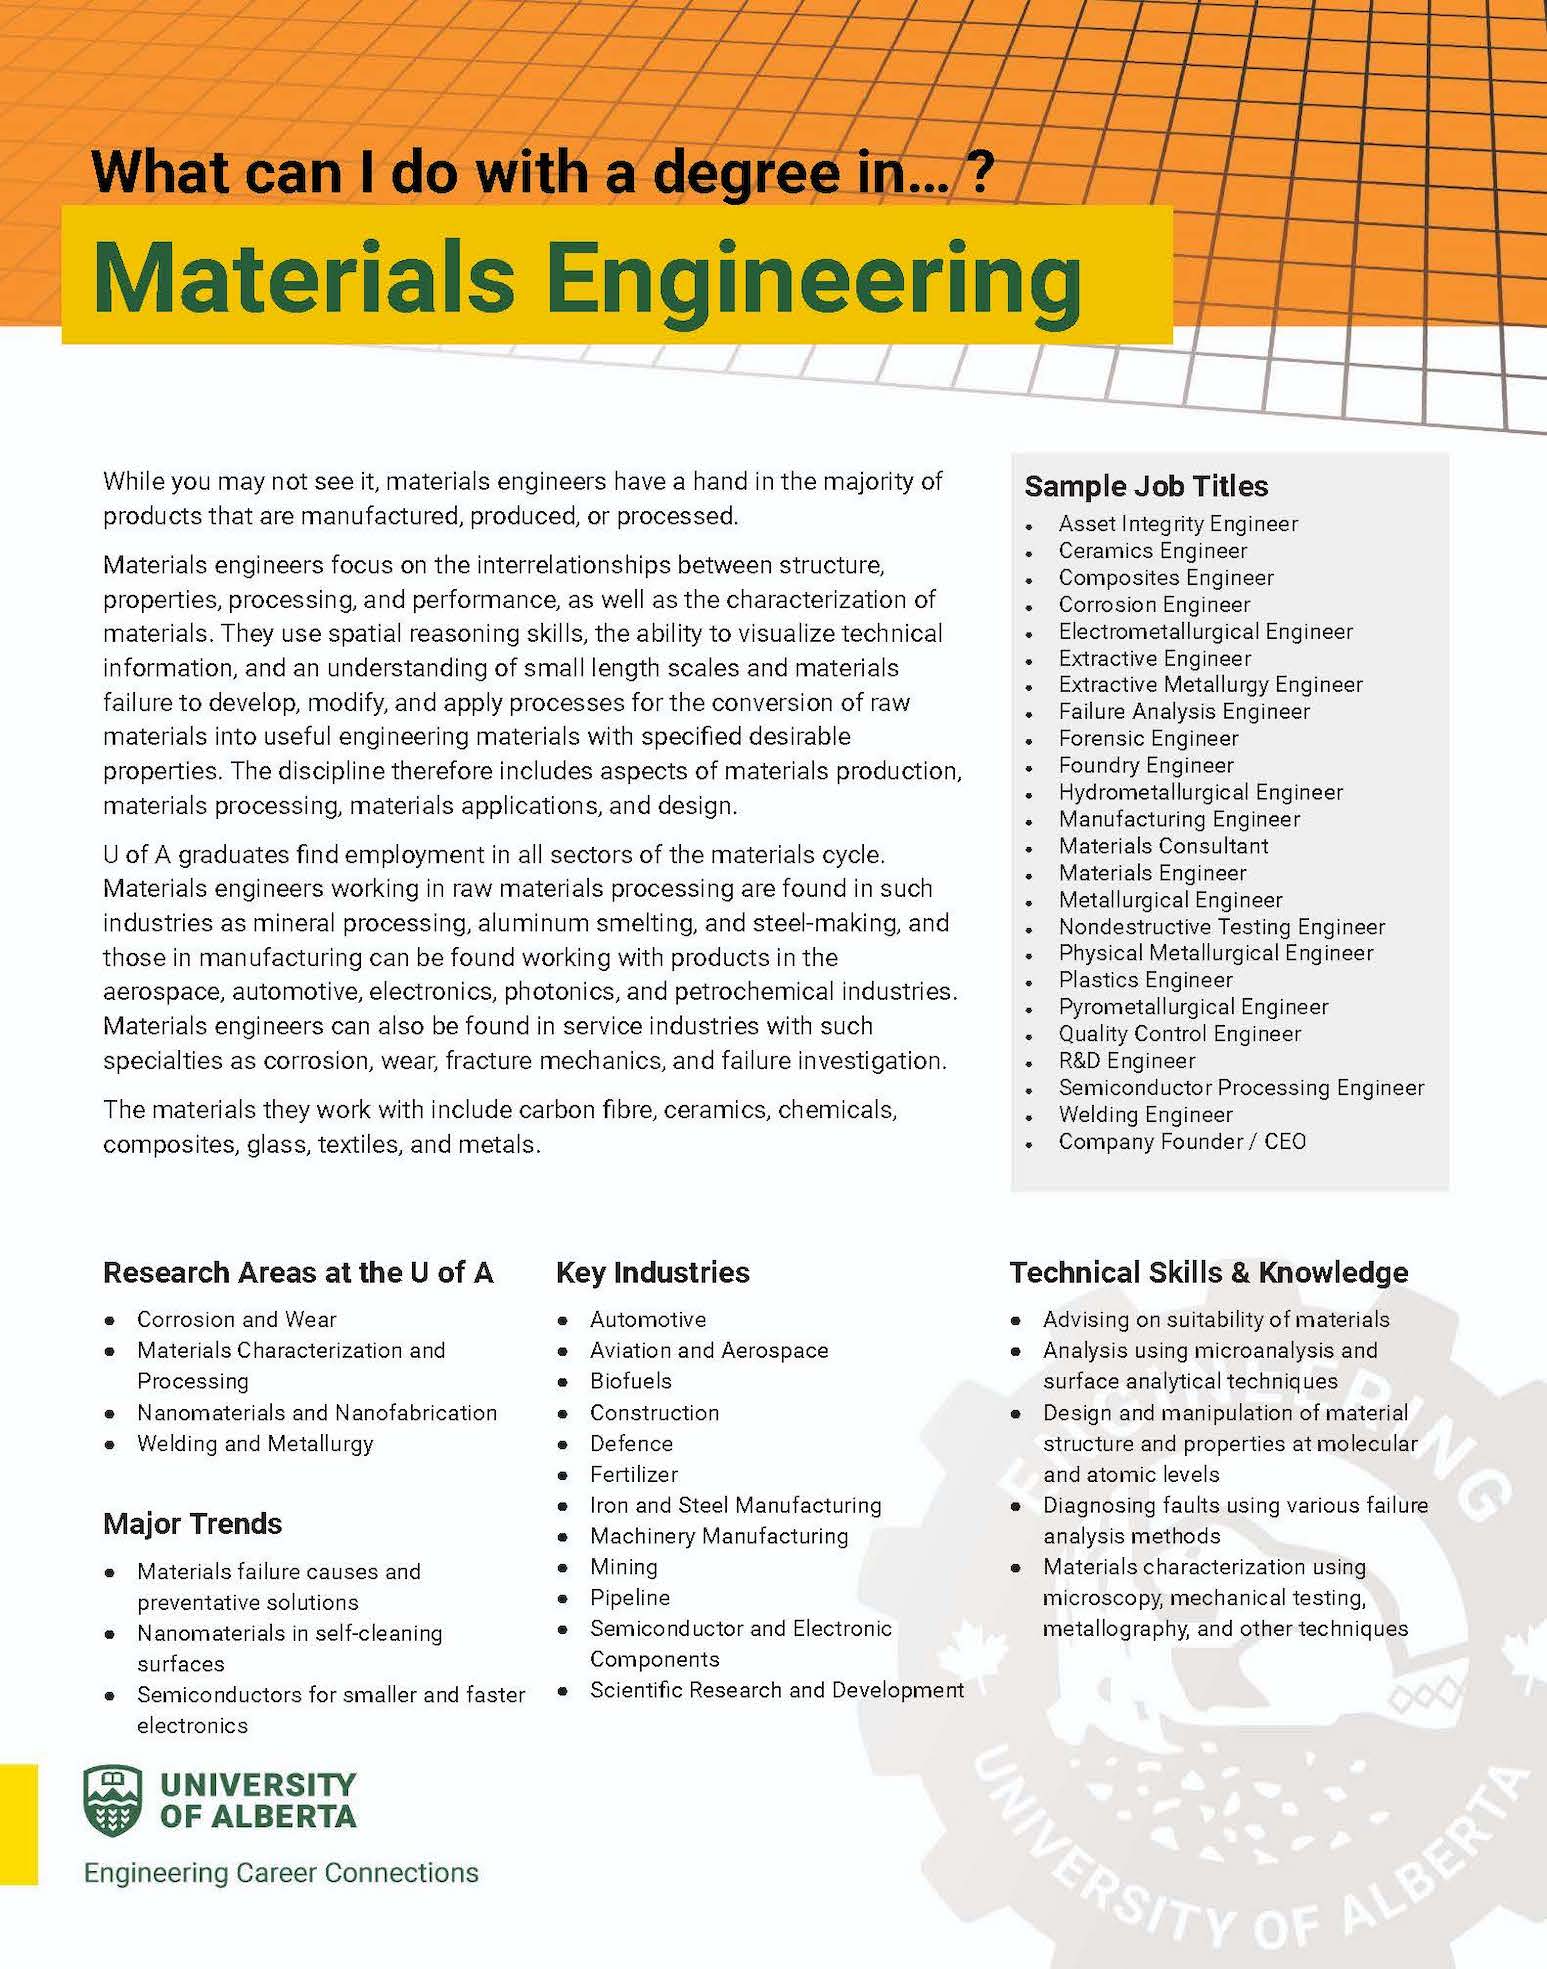 Screenshot of the "What Can I Do With A Degree in Materials Engineering?” Handout. The image links to the handout.